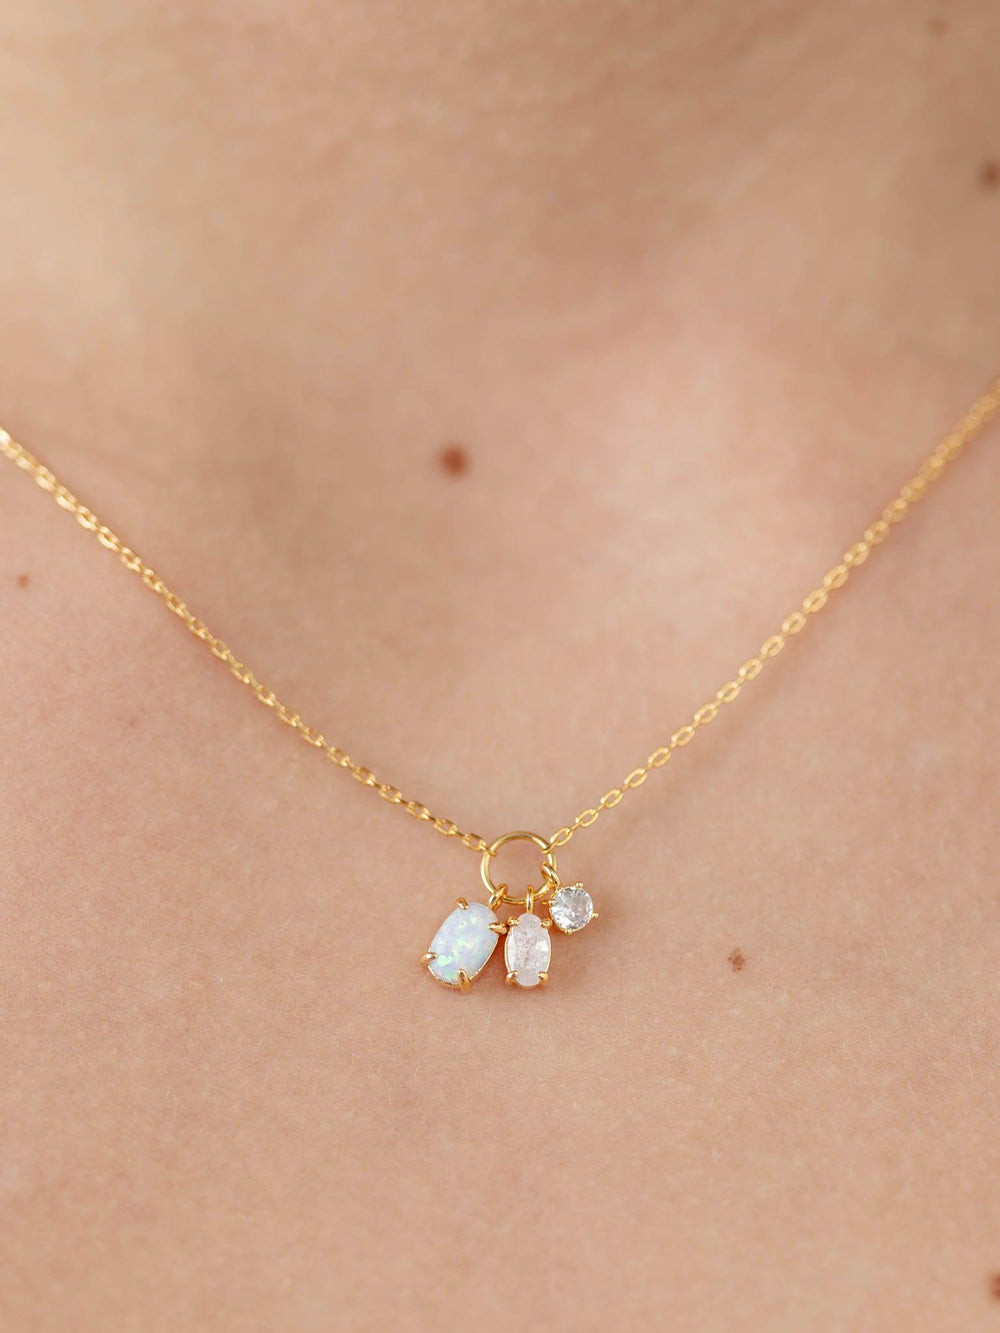 Fame-Dainty Opal Crystal Charm Necklace - Leela and Lavender